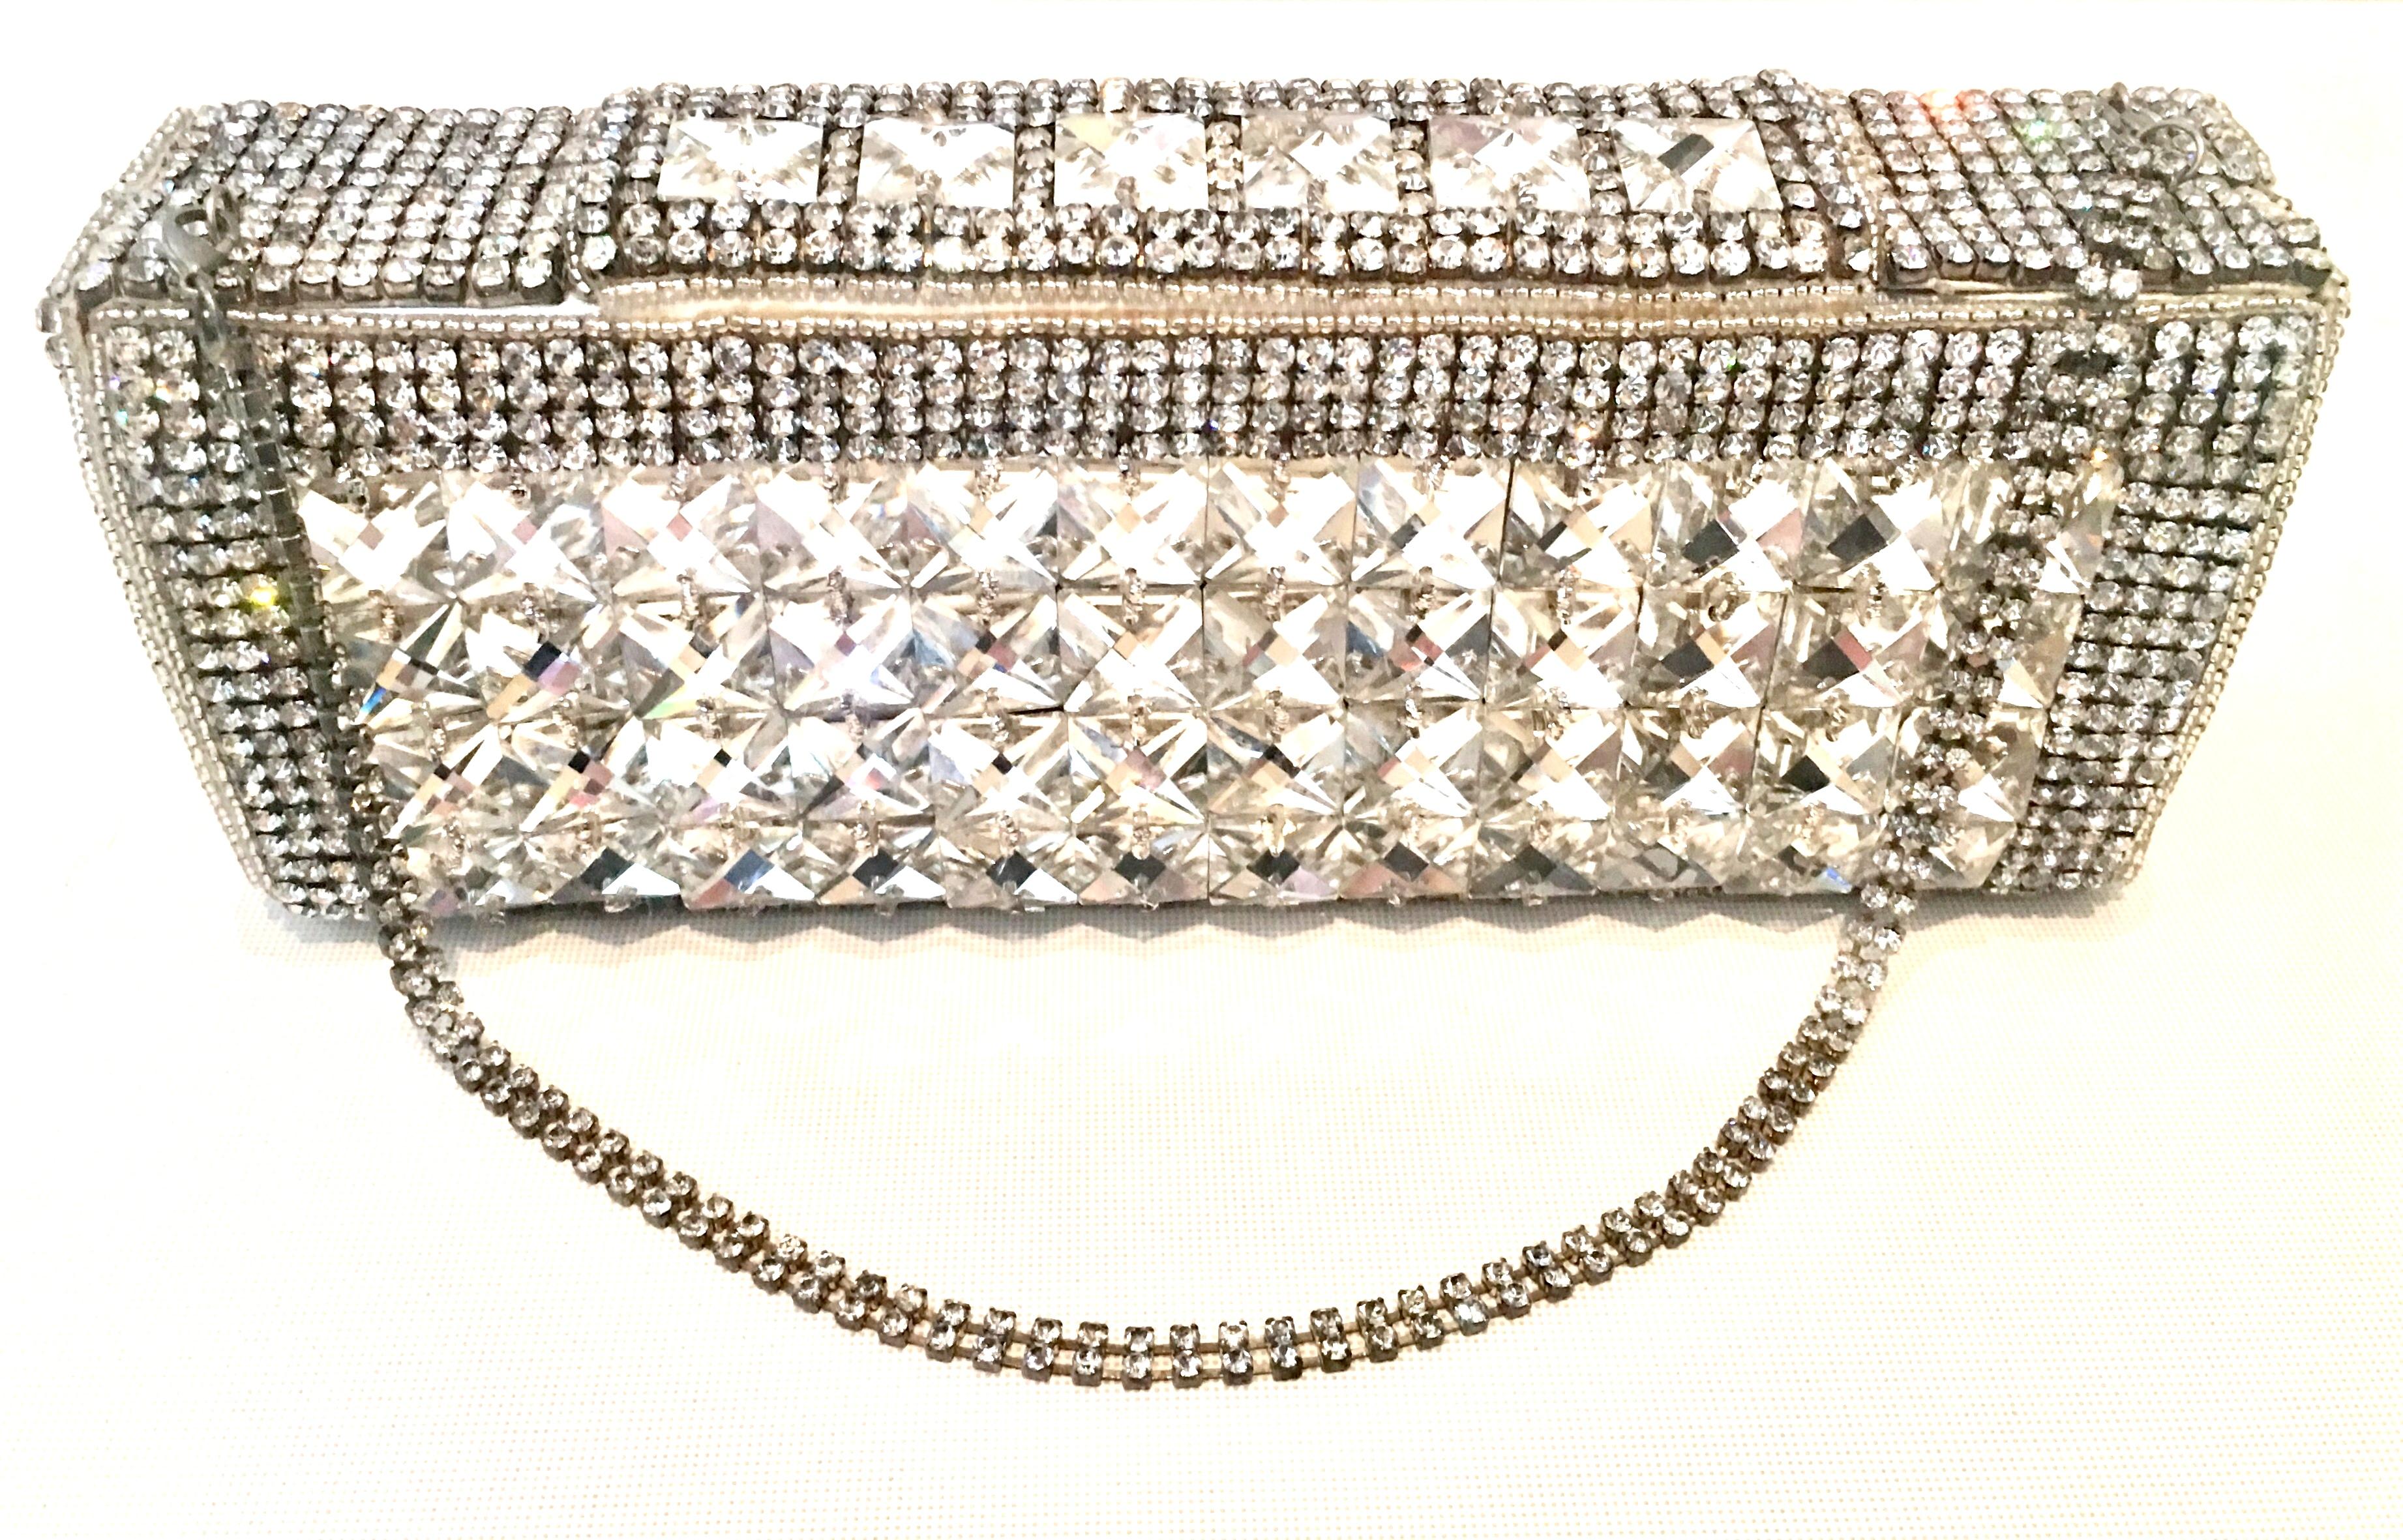 Contemporary & New Hand Crafted Silver Metallic Swarovski Crystal Clear Rhinestone Embellished Evening Bag By, Bougainvillea. This hand crafted box style hand bag features a silver metallic leather base fully encrusted with hand applied crystal